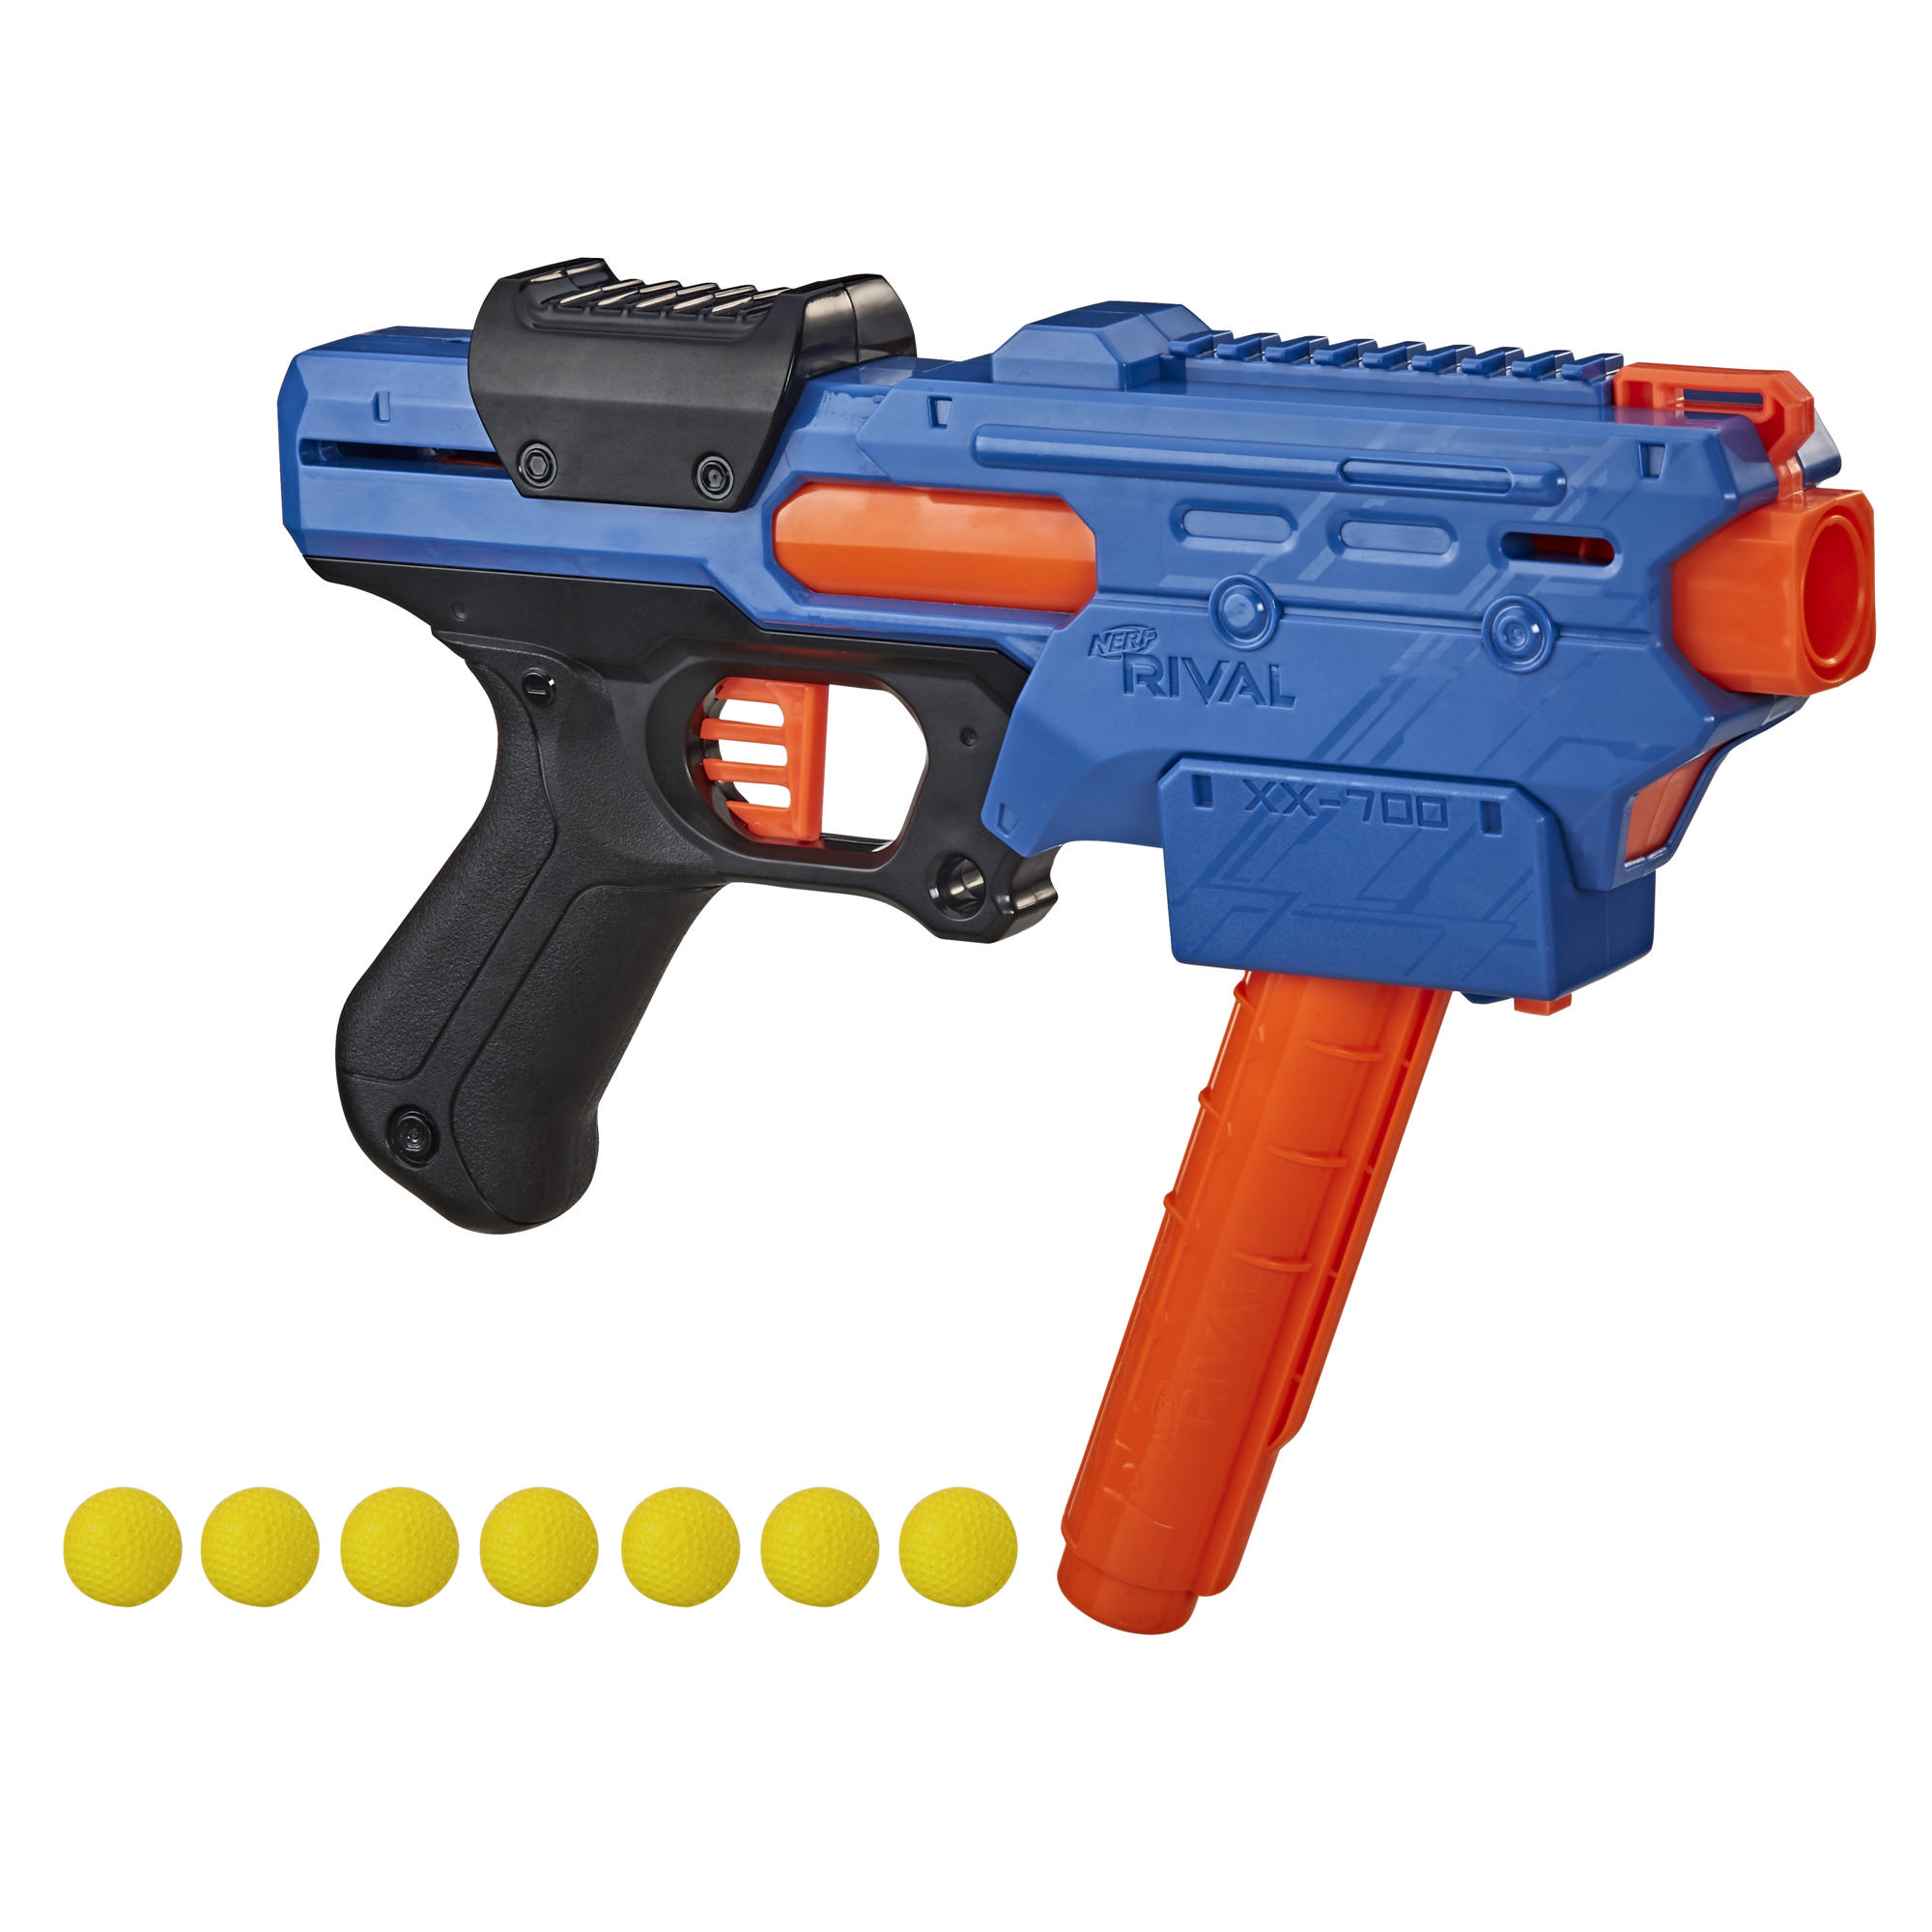 Nerf Rival Finisher XX-700 Blaster -- Quick-Load Magazine, Spring Action, 7 Nerf Rival Rounds -- Team Blue